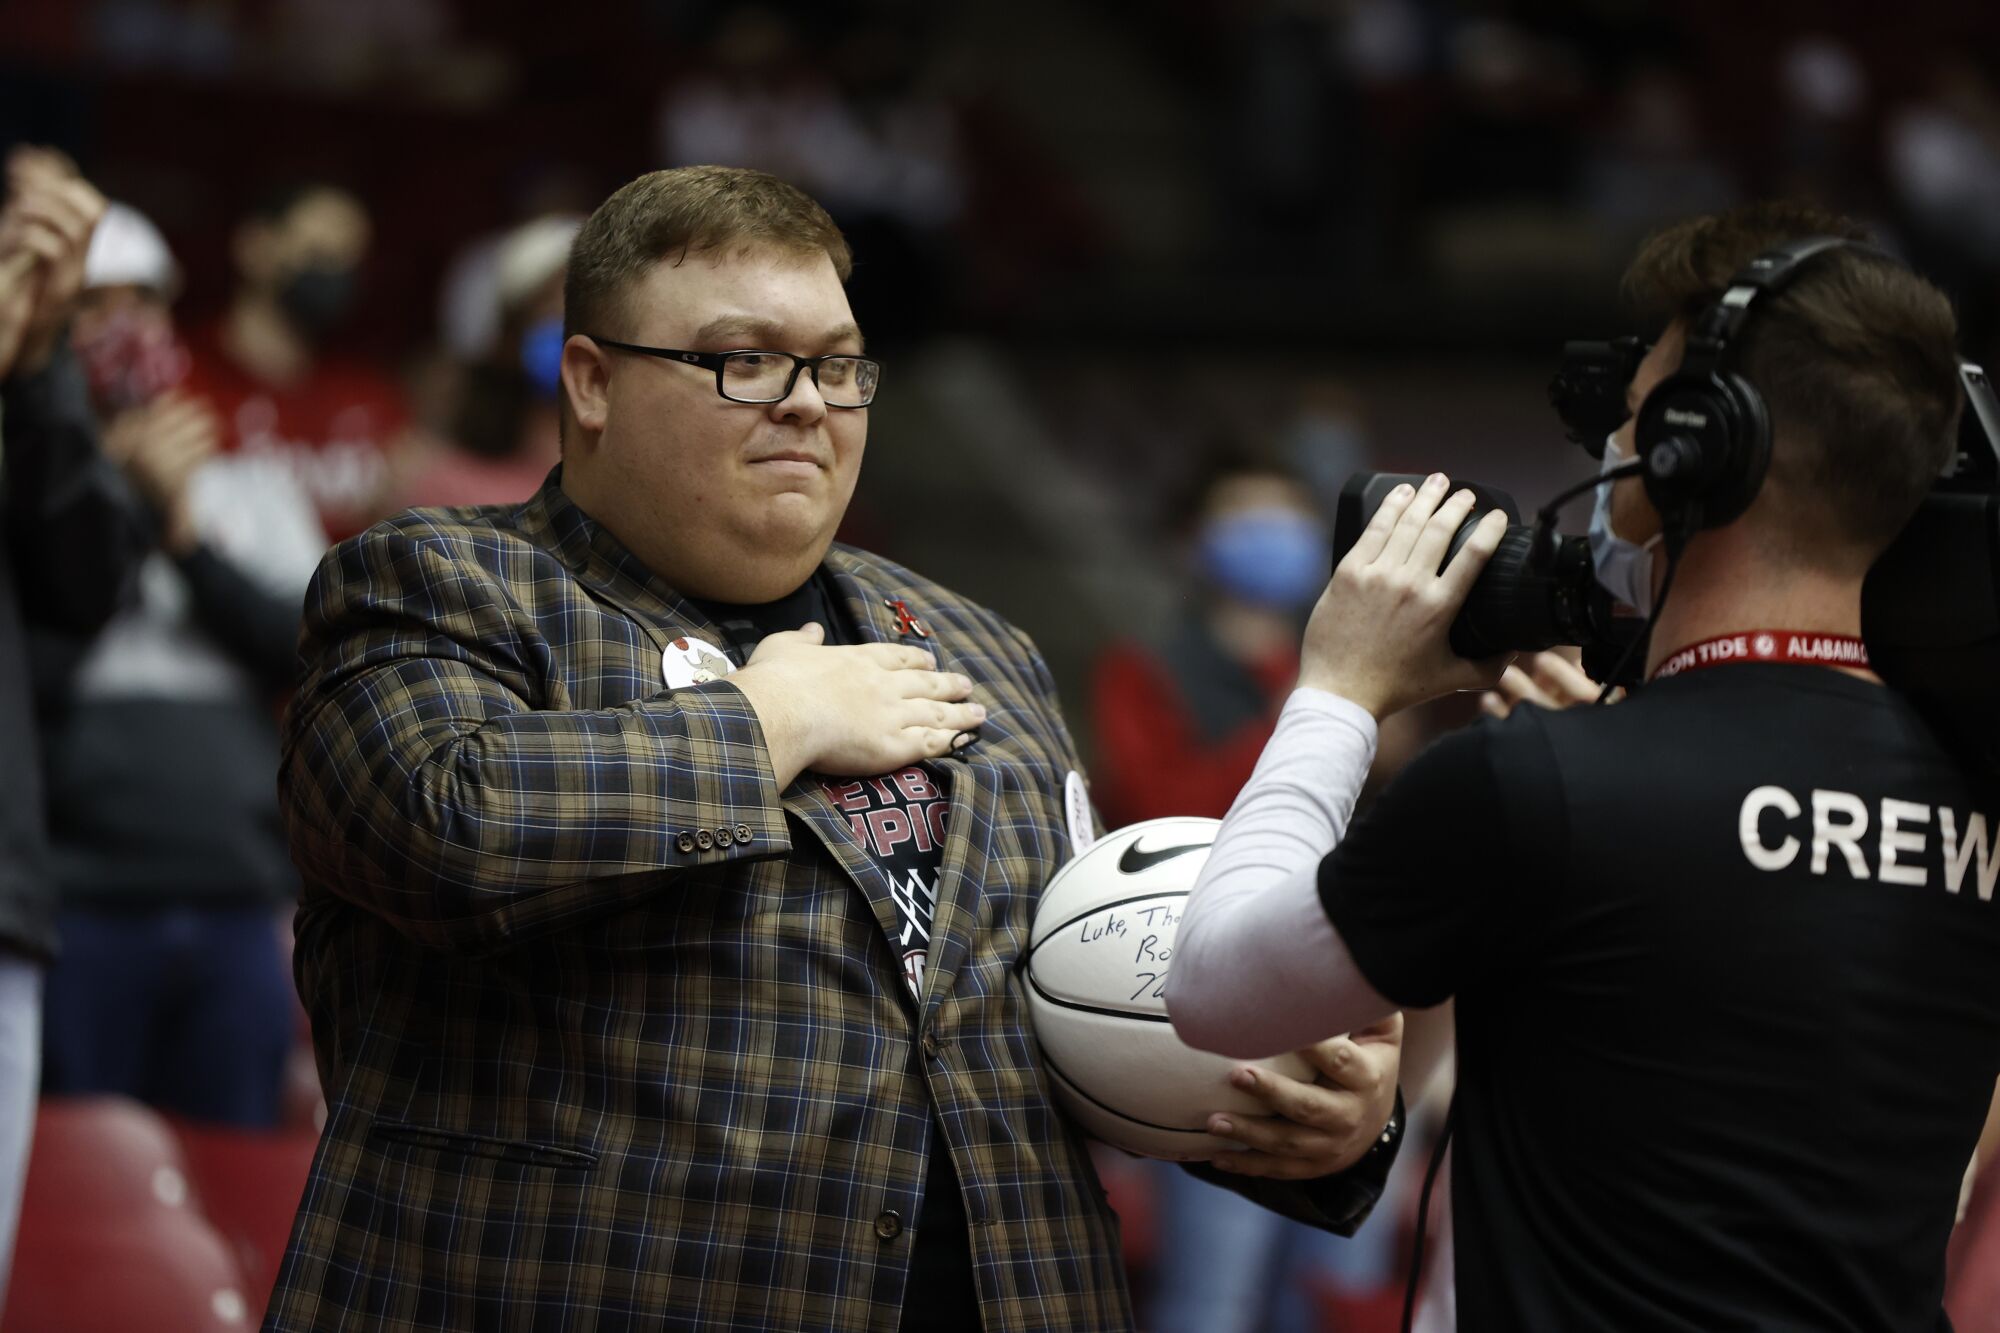 Alabama superfan Luke Ratliff holds a hand over his heart as he receives a signed basketball.